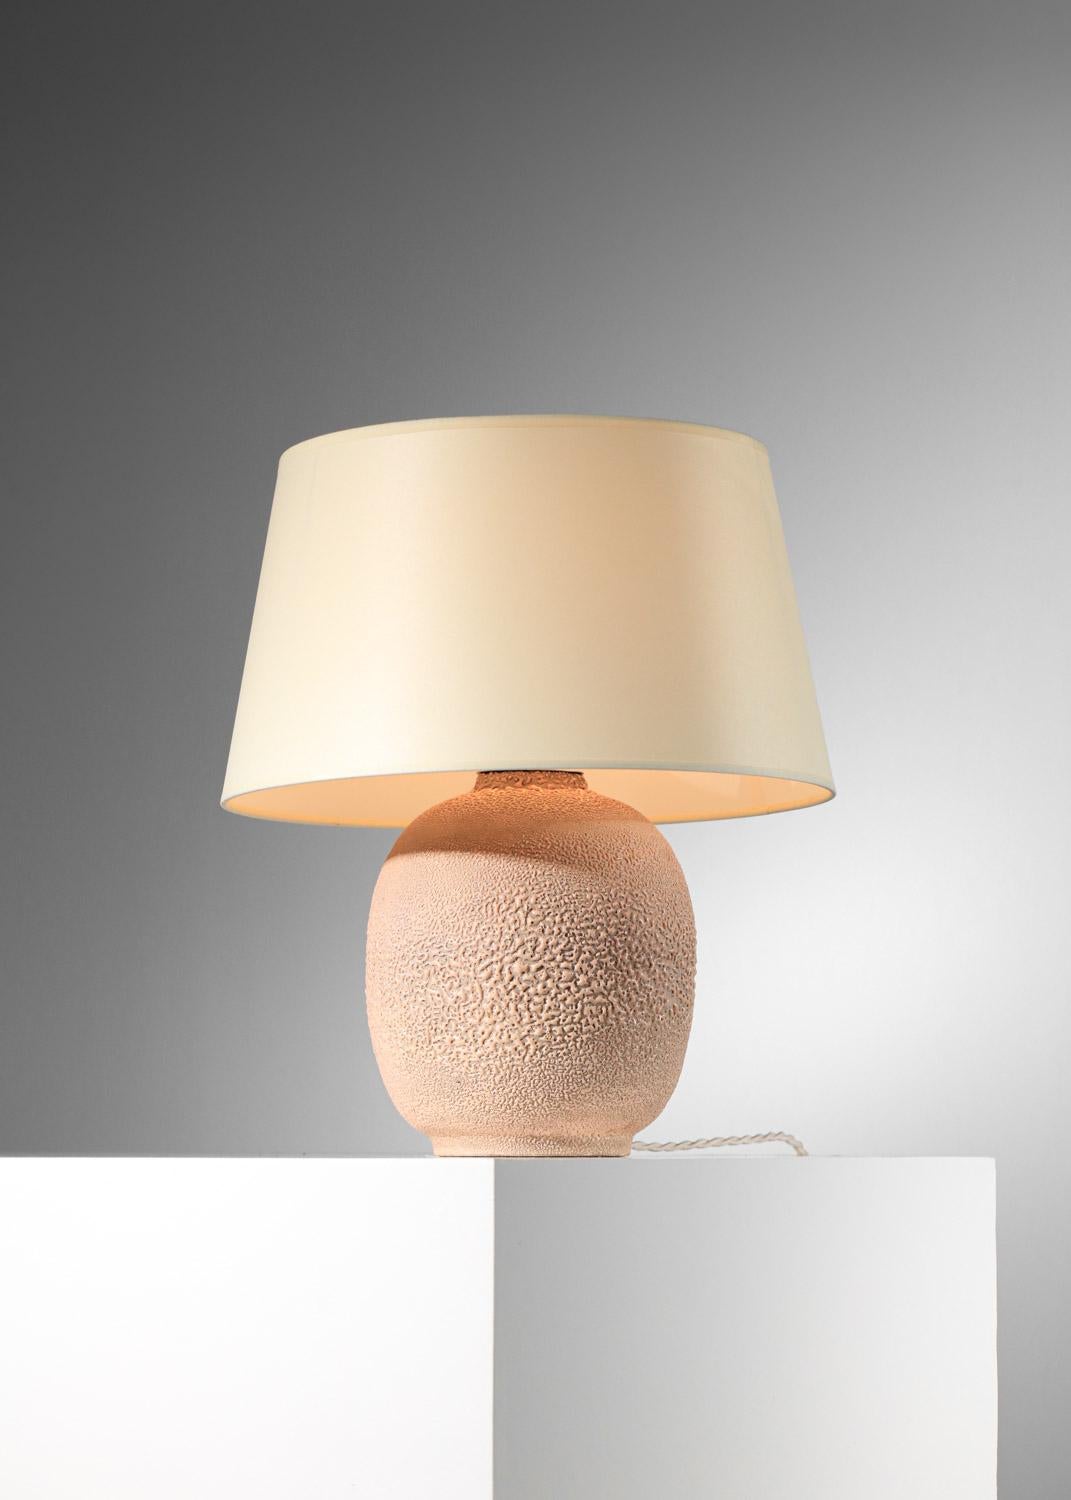 Bedside lamp from the 40's / 50's by Etlin. Pale pink textured ceramic base structure, presentation shade sold on request. Very nice vintage condition, electrical system refurbished keeping the original socket (see photos). Type B22 LED bulb